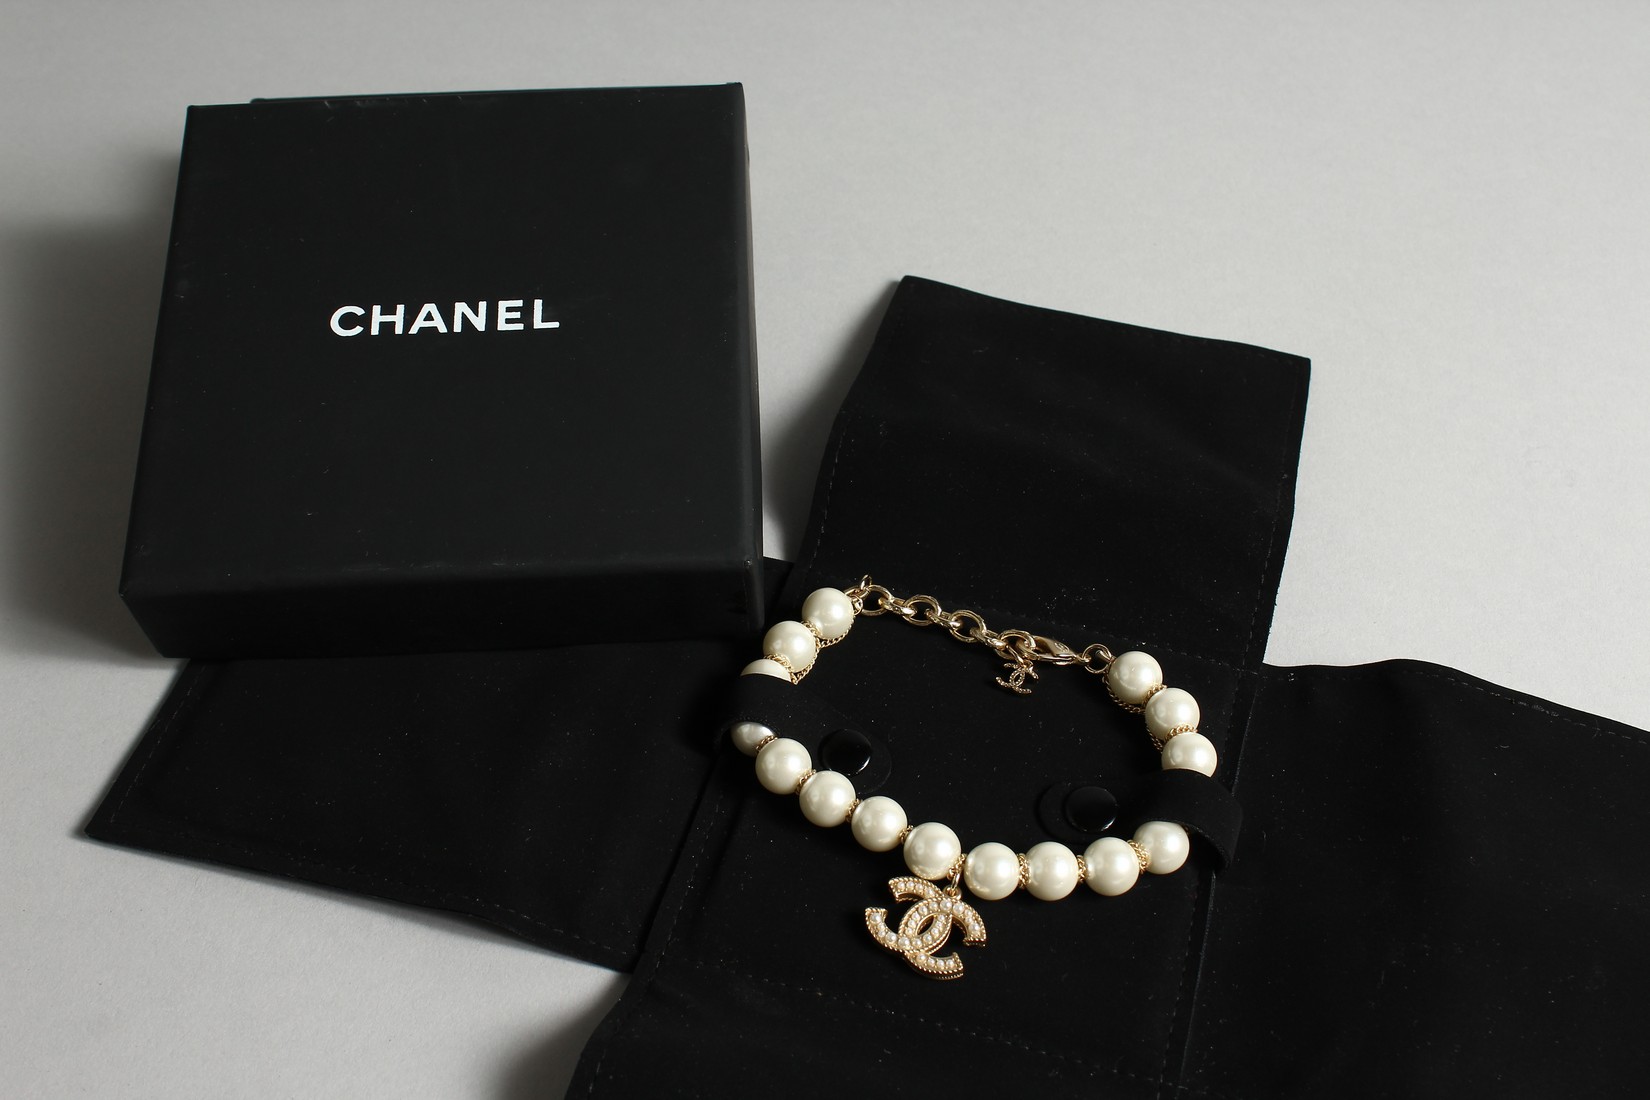 A CHANEL STYLE PEARL AND ENTWINED C BRACELET in a Chanel box - Image 5 of 6